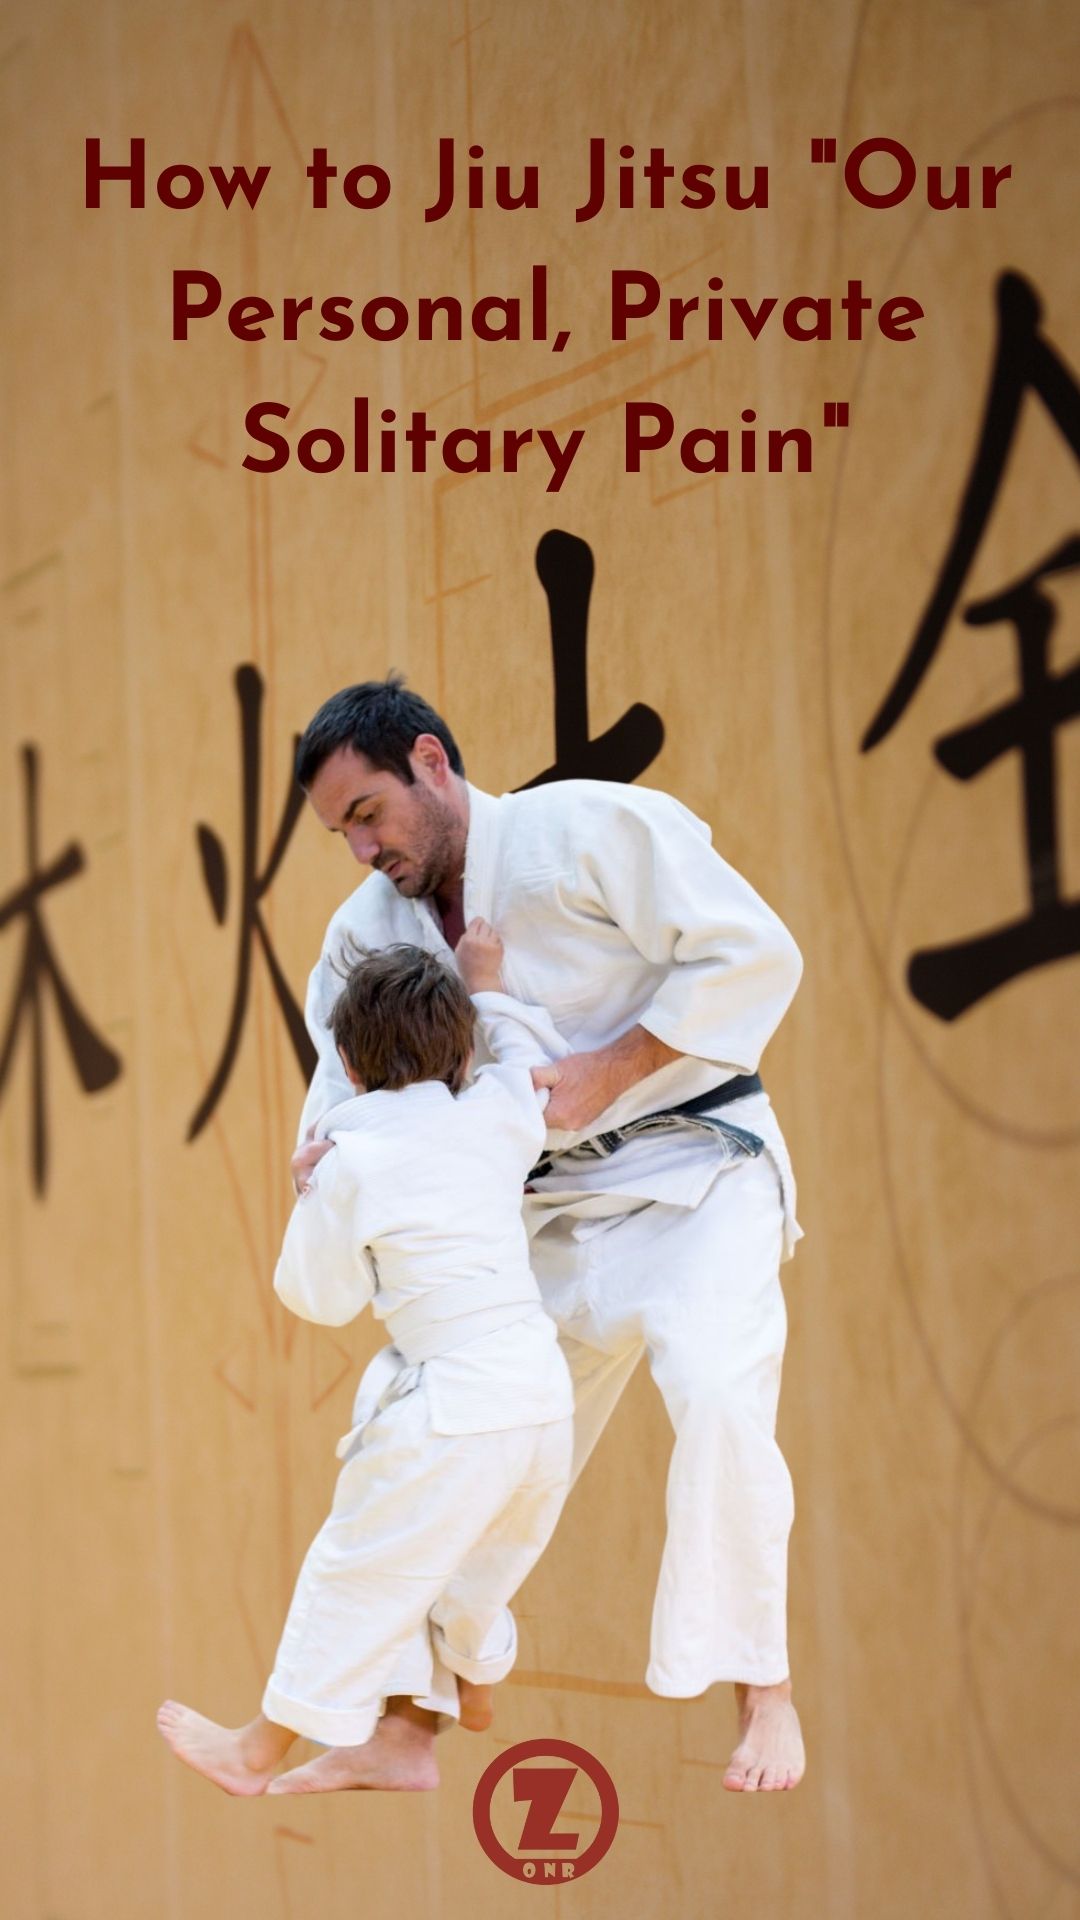 You are currently viewing How to Jiu Jitsu “Our Personal, Private Solitary Pain” – Step 6